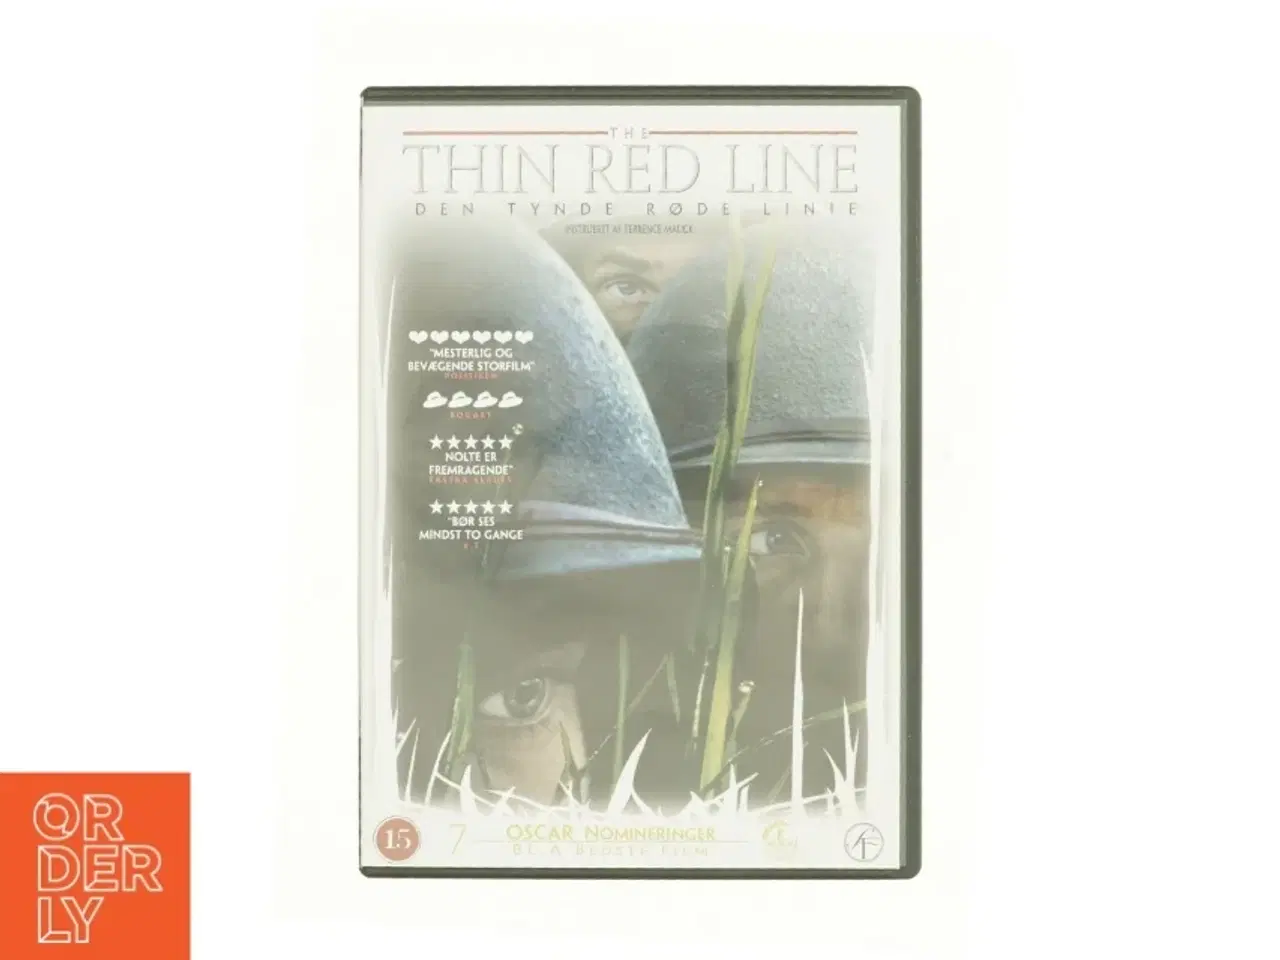 Billede 1 - the Thin Red Line